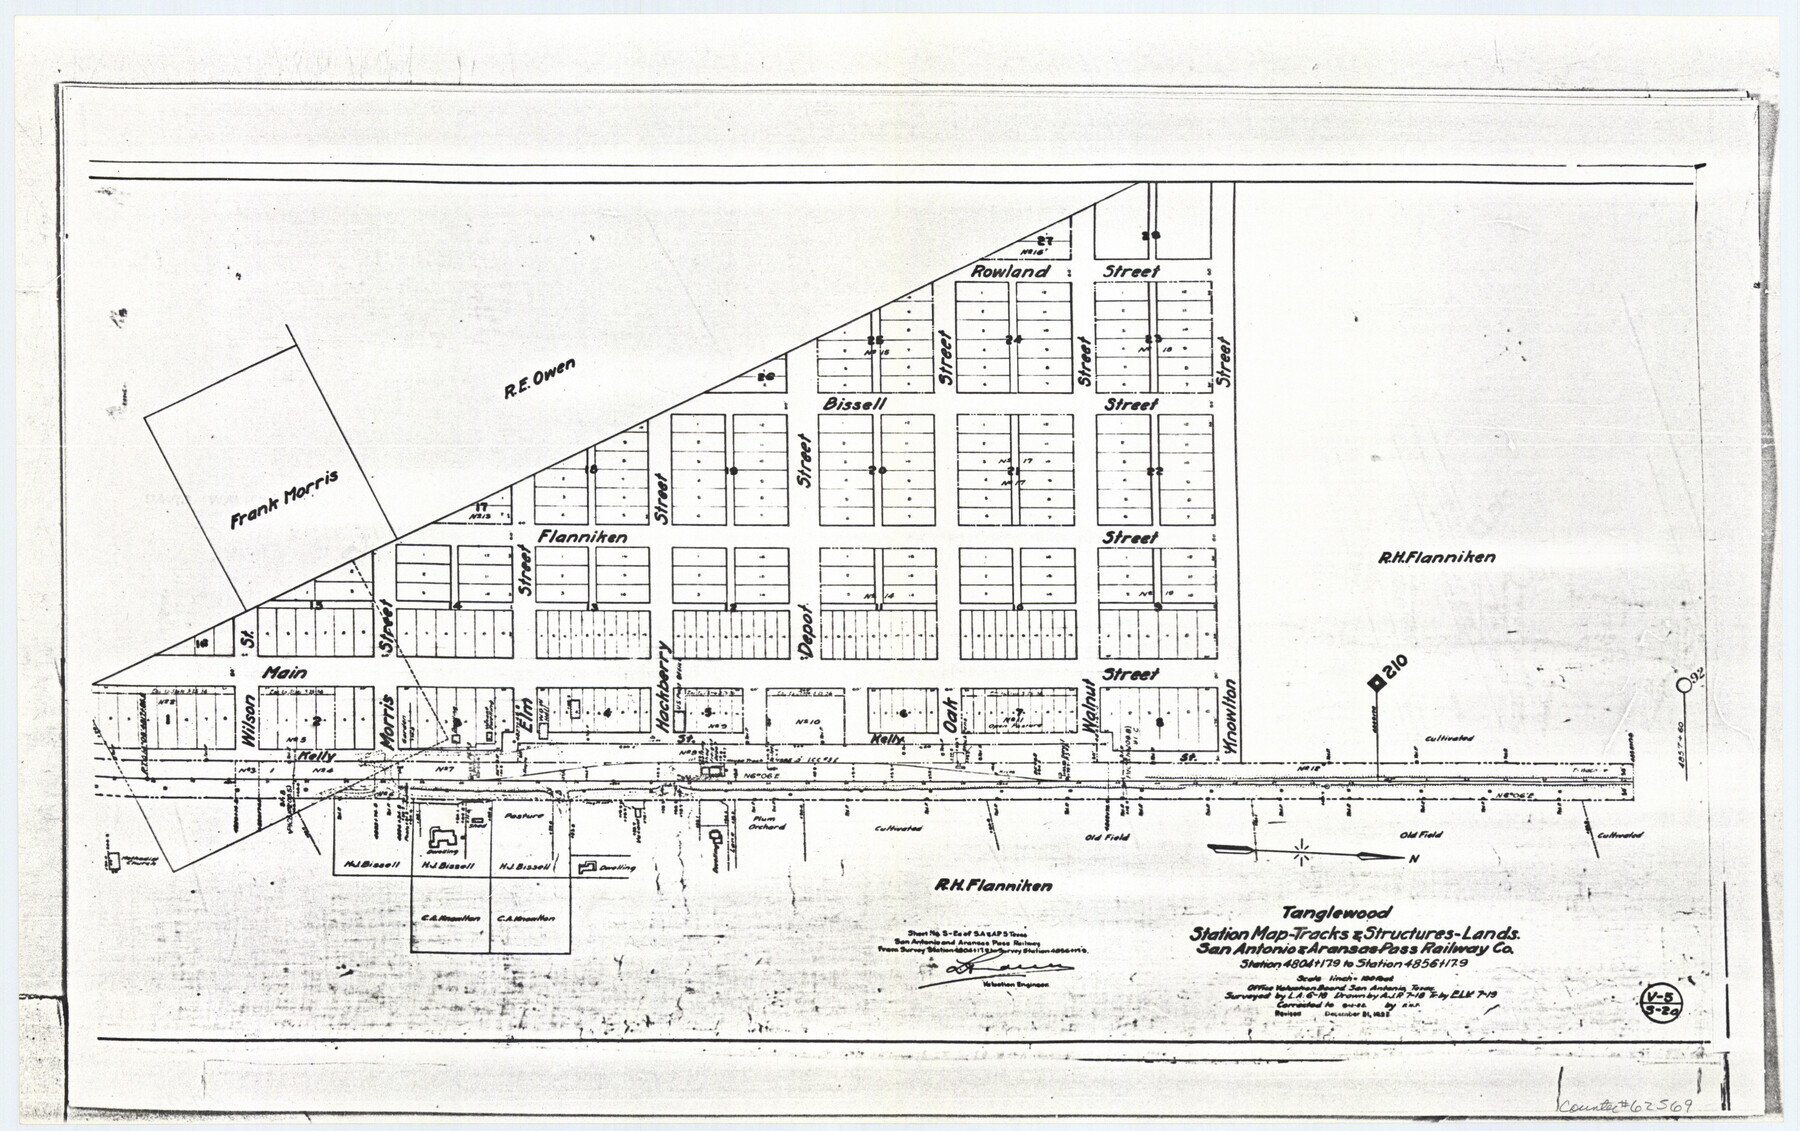 62569, Tanglewood, Station Map-Tracks & Structures-Lands, San Antonio & Aransas Pass Railway Co., Station 4804+179 to Station 4856+179, General Map Collection